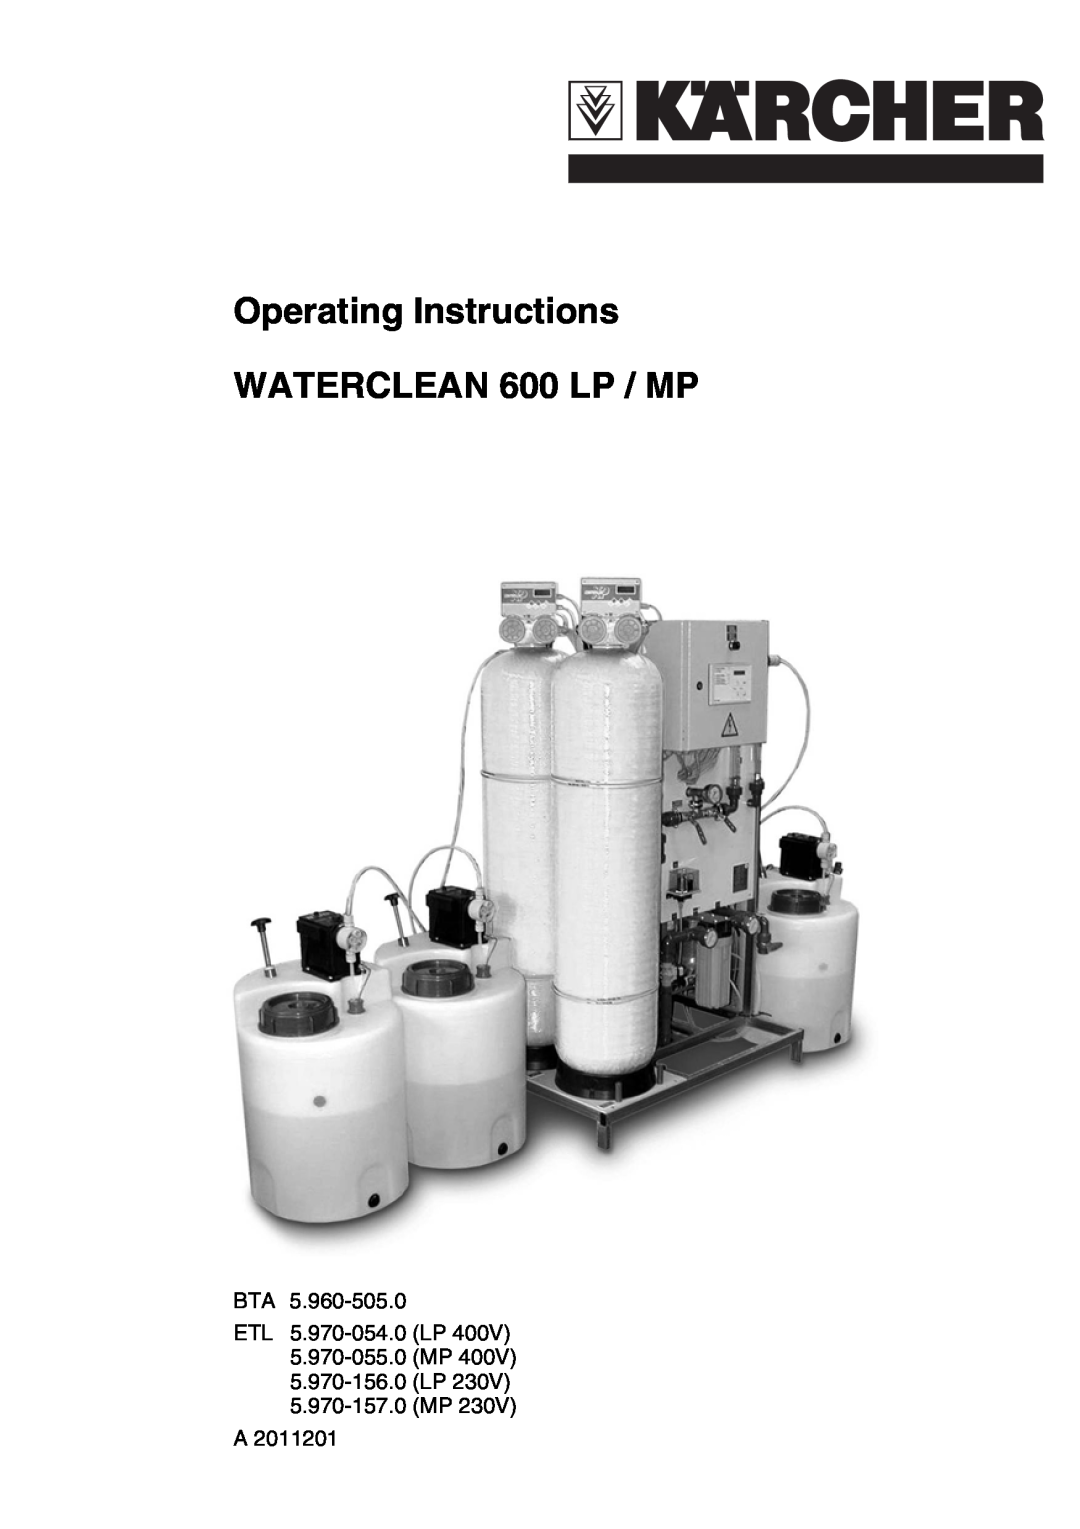 Karcher A 2011201 manual Operating Instructions WATERCLEAN 600 LP / MP 